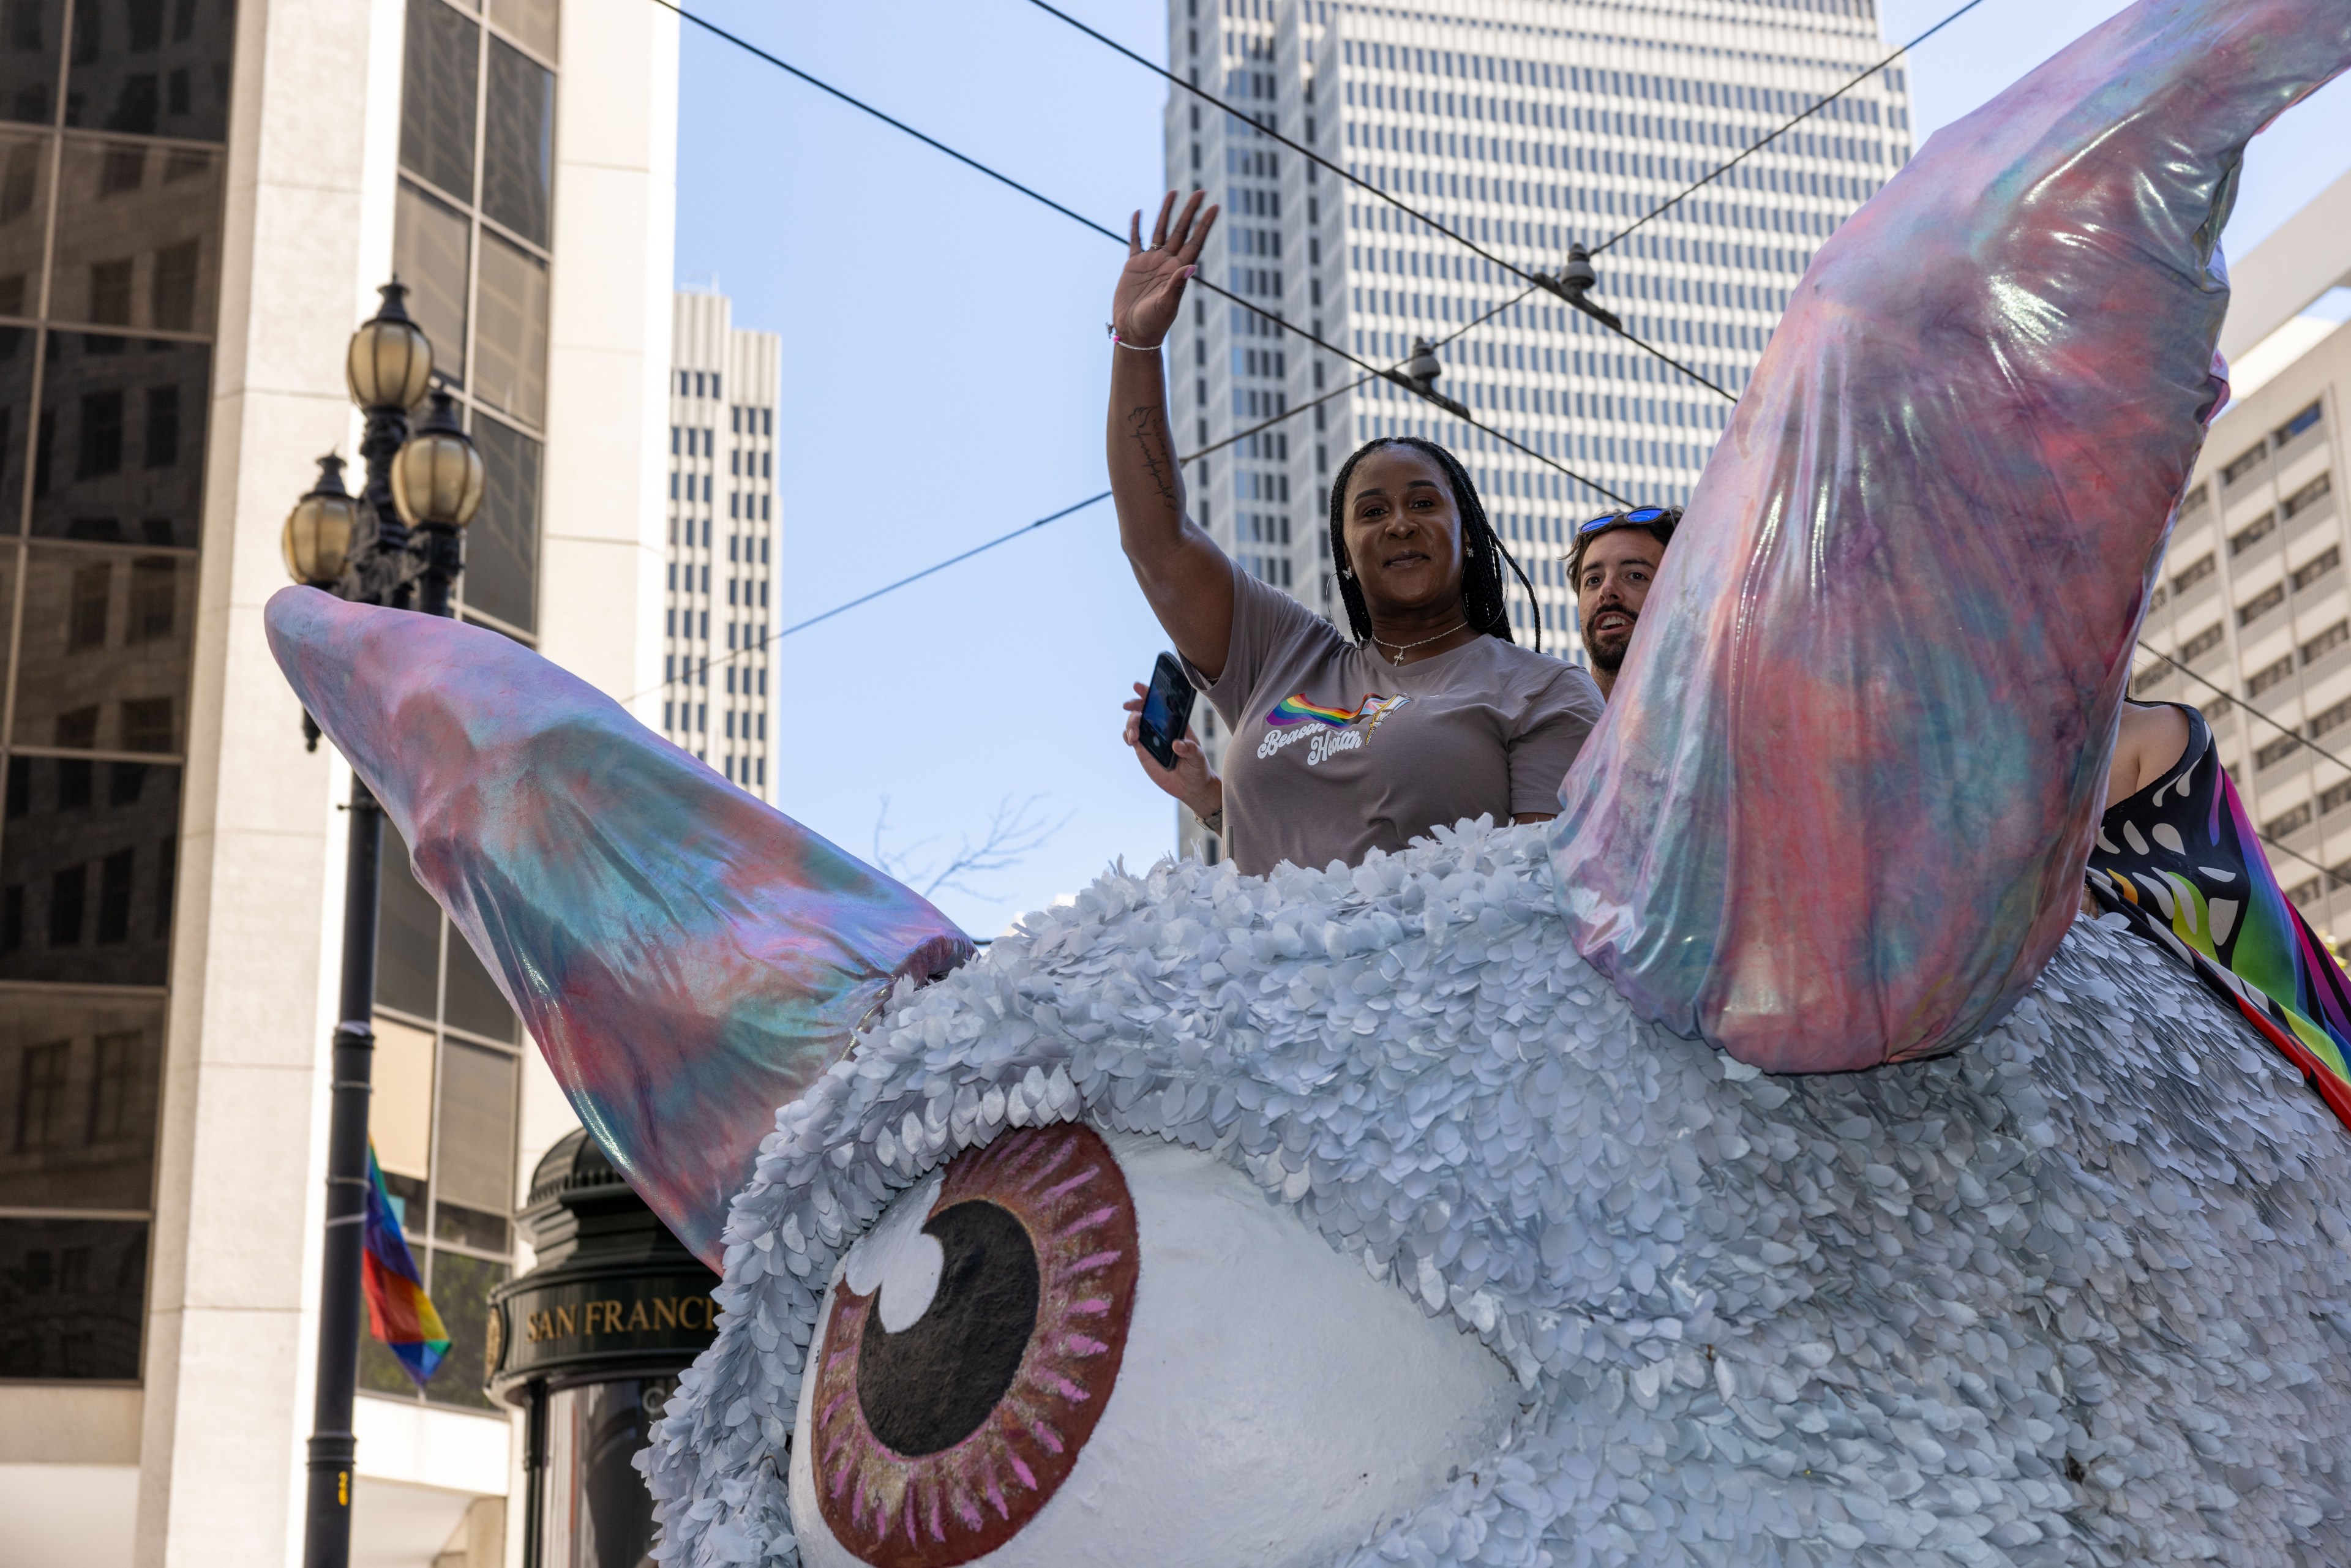 Two people wave from atop a large, colorful creature float with big ears and an eye, set against a cityscape of tall buildings and street cables.